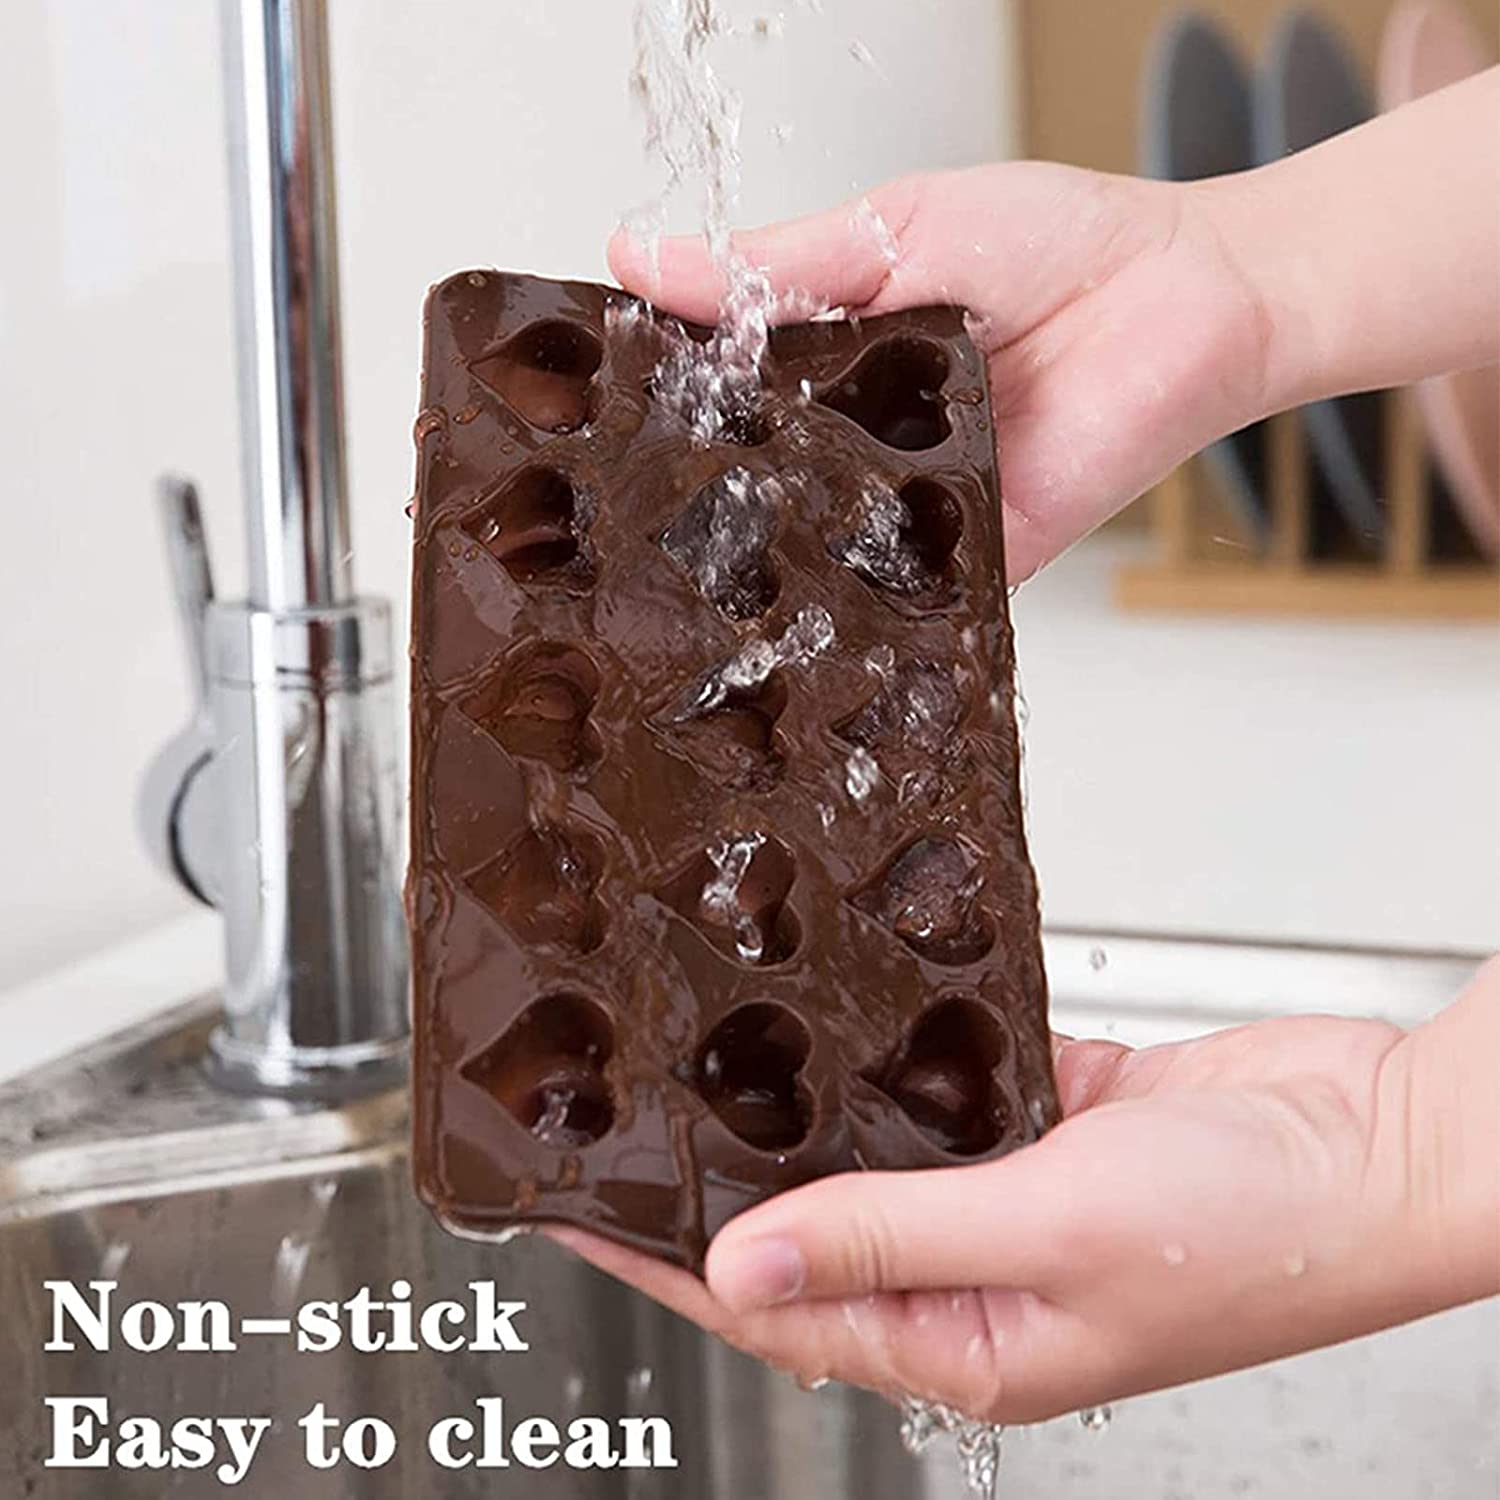 Webake Candy Molds Silicone Chocolate Molds, Baking Mold for Jello